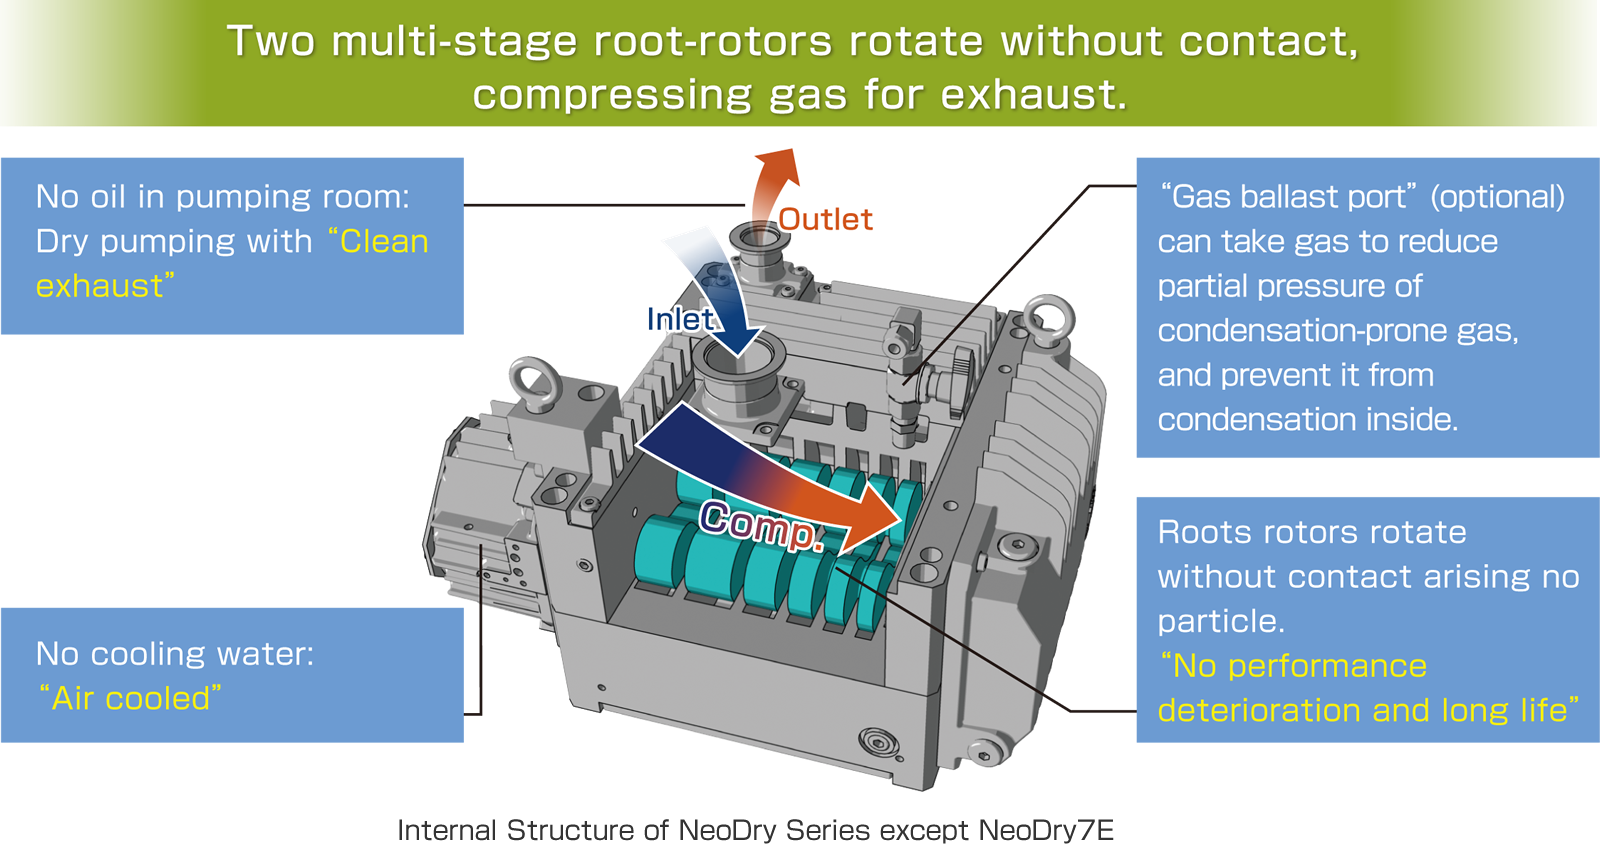 Two multi-stage root-rotors rotate without contact, compressing gas for exhaust.